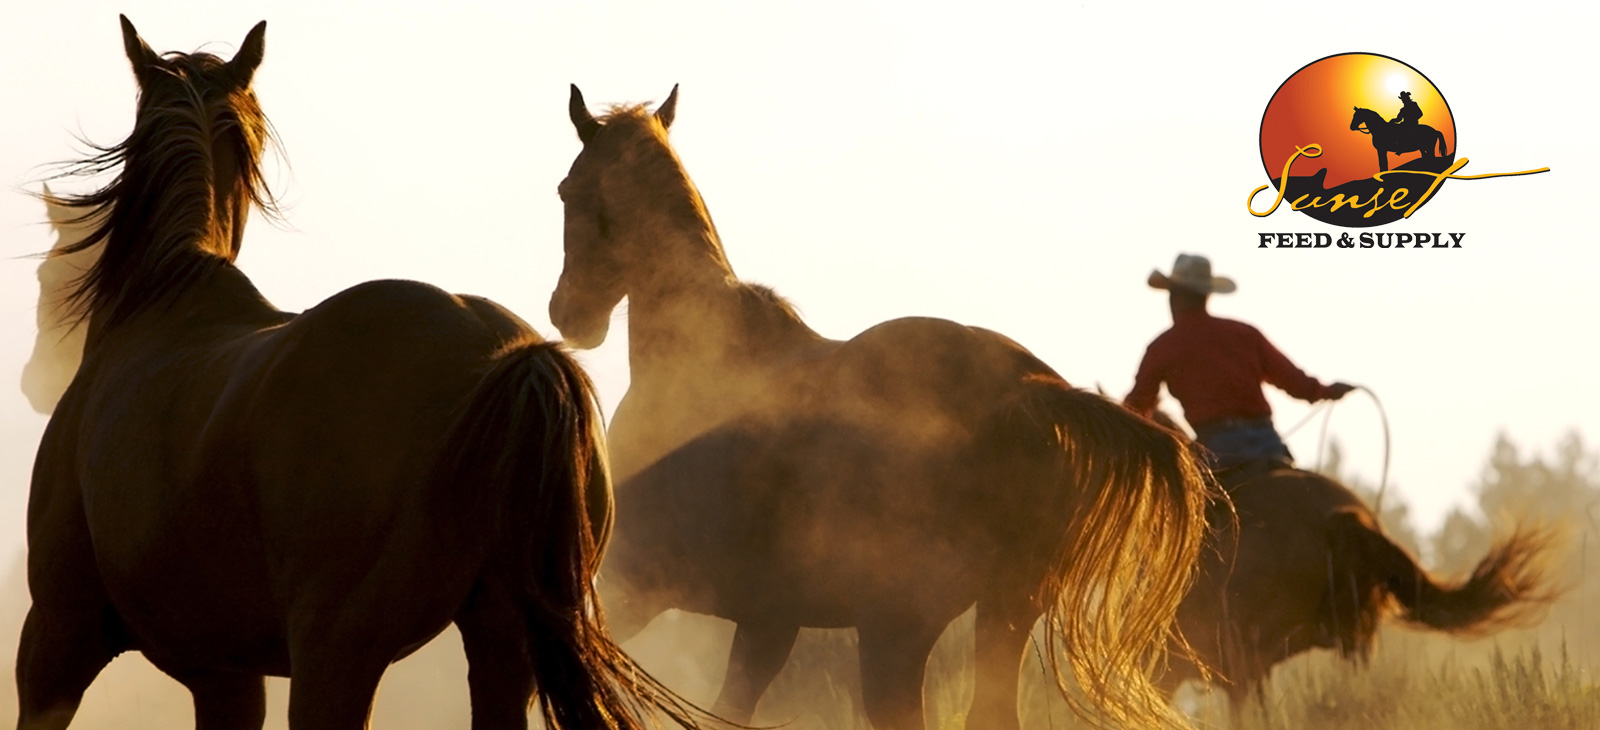 Animal Feed and Supplies, Western Wear, Riding Supplies